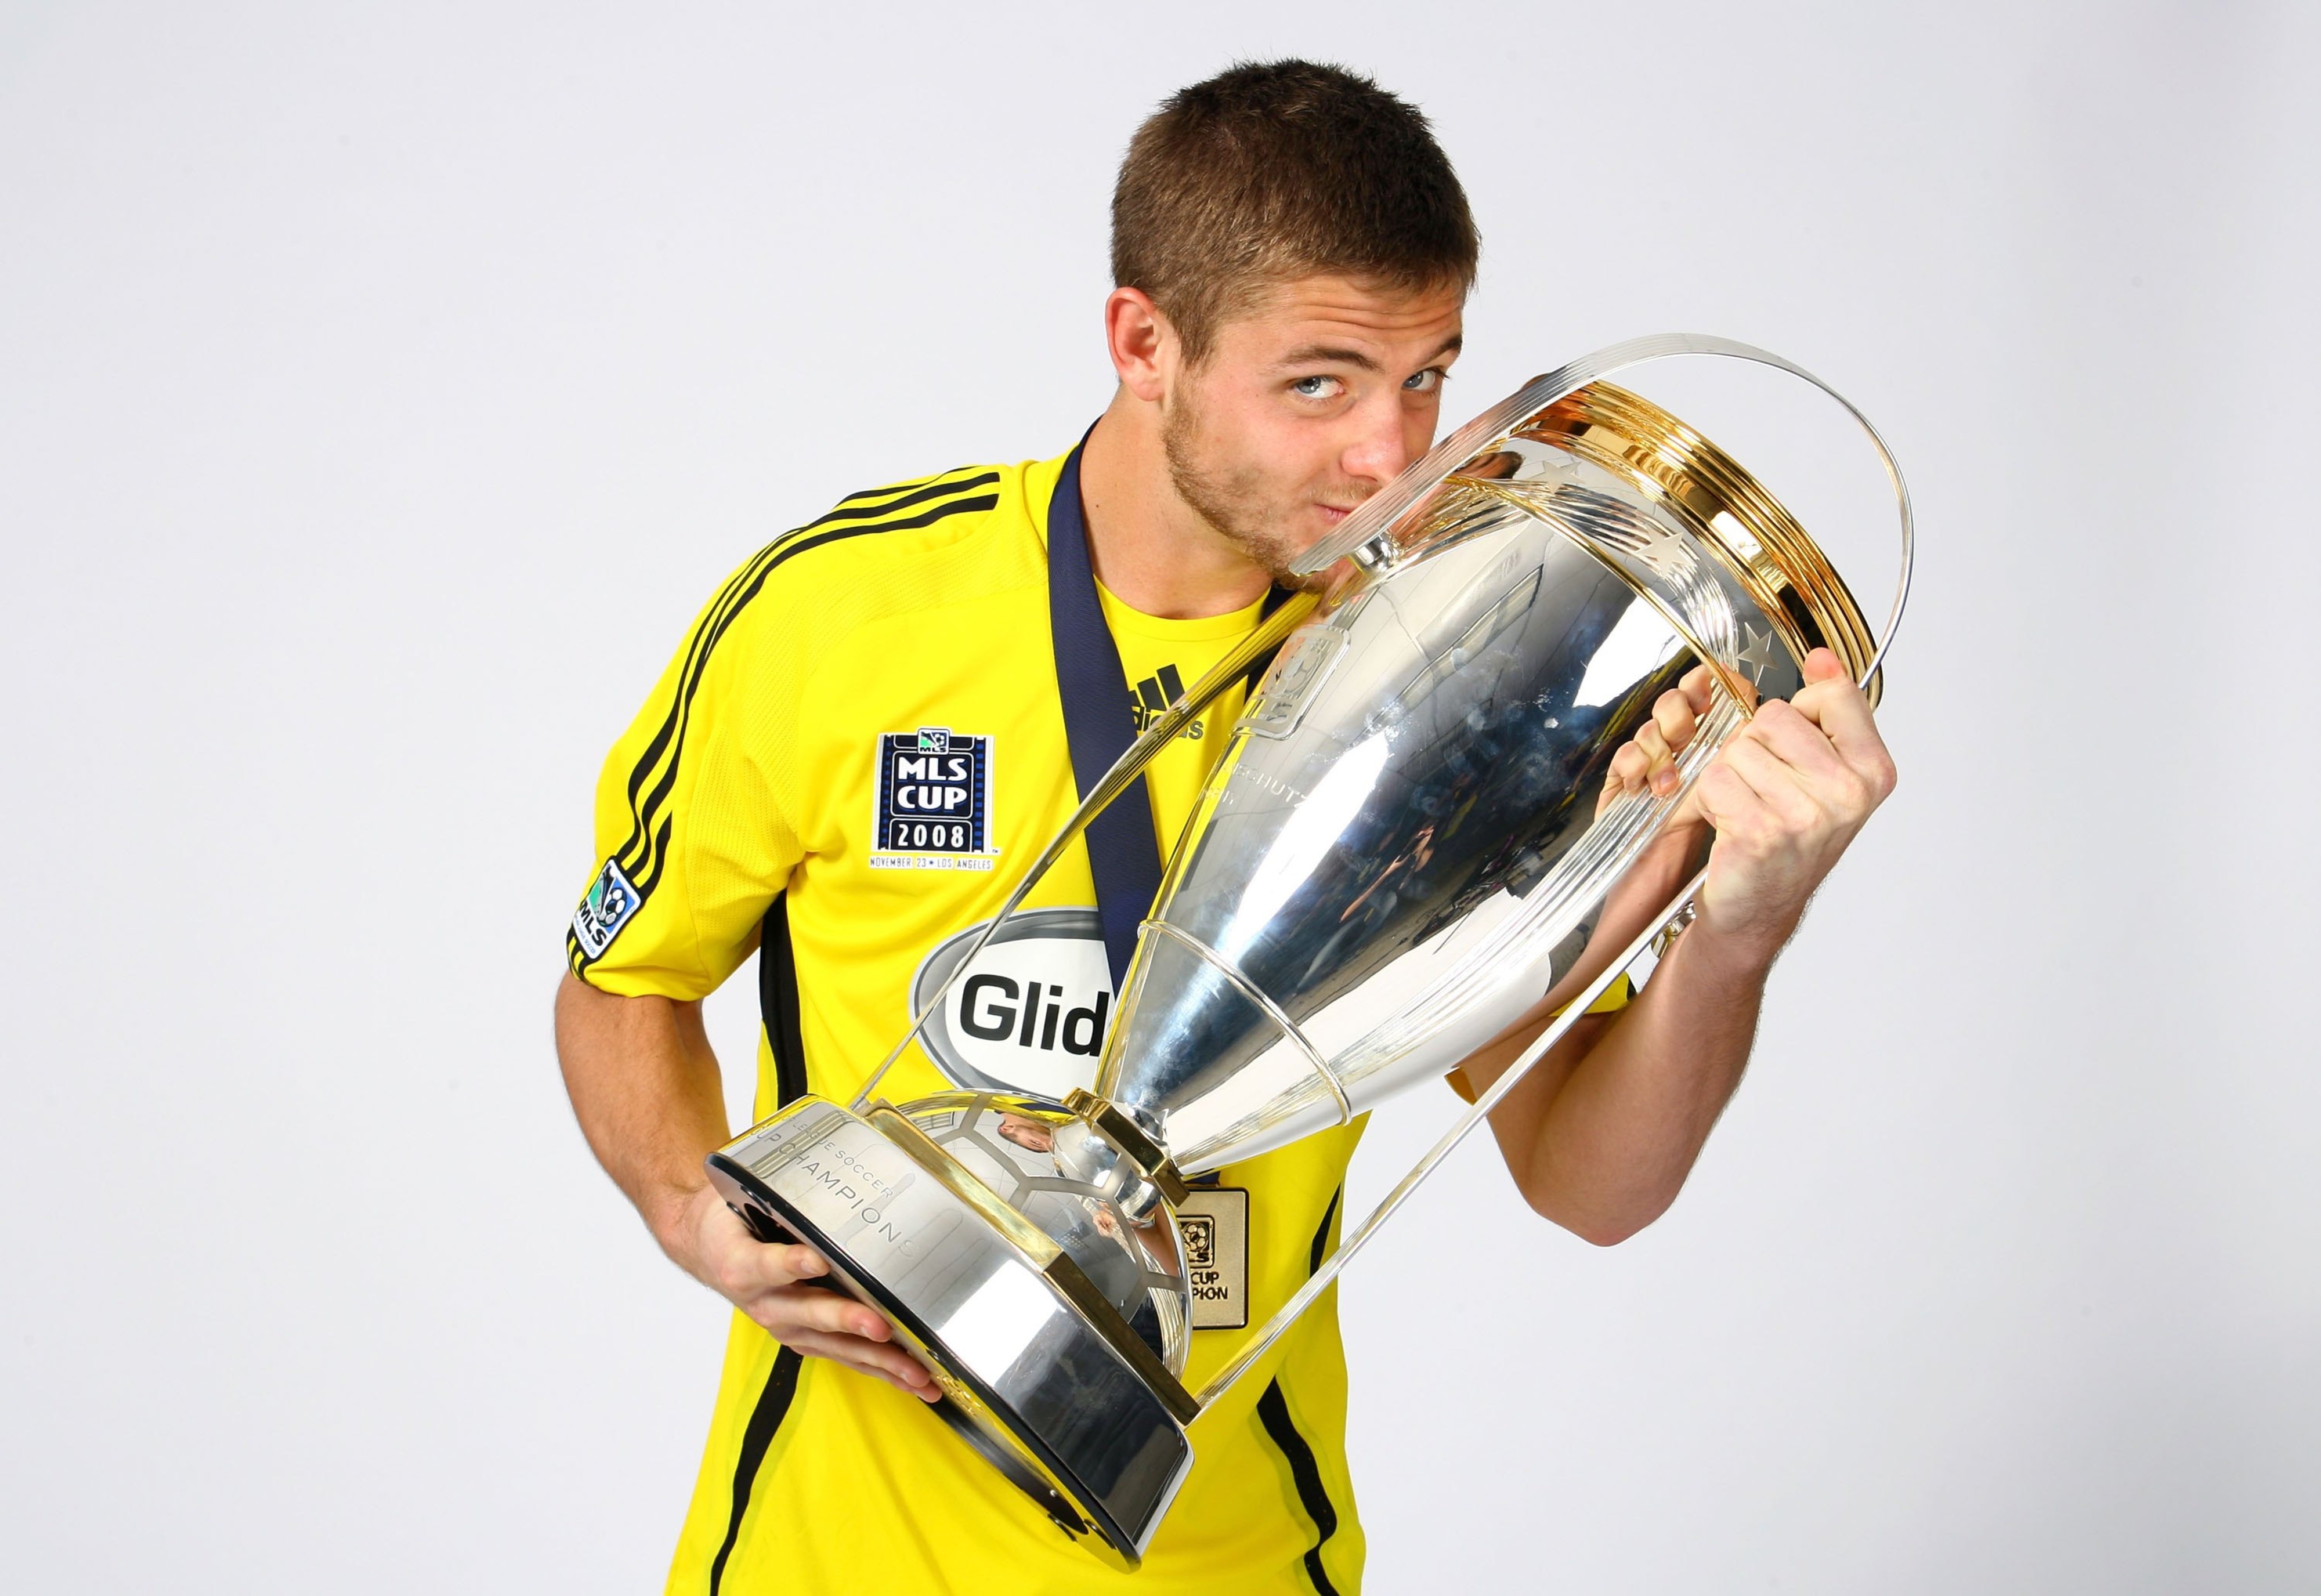 Could Robbie Rogers one day bring an MLS Cup back to Chicago and become the city's newest hero?